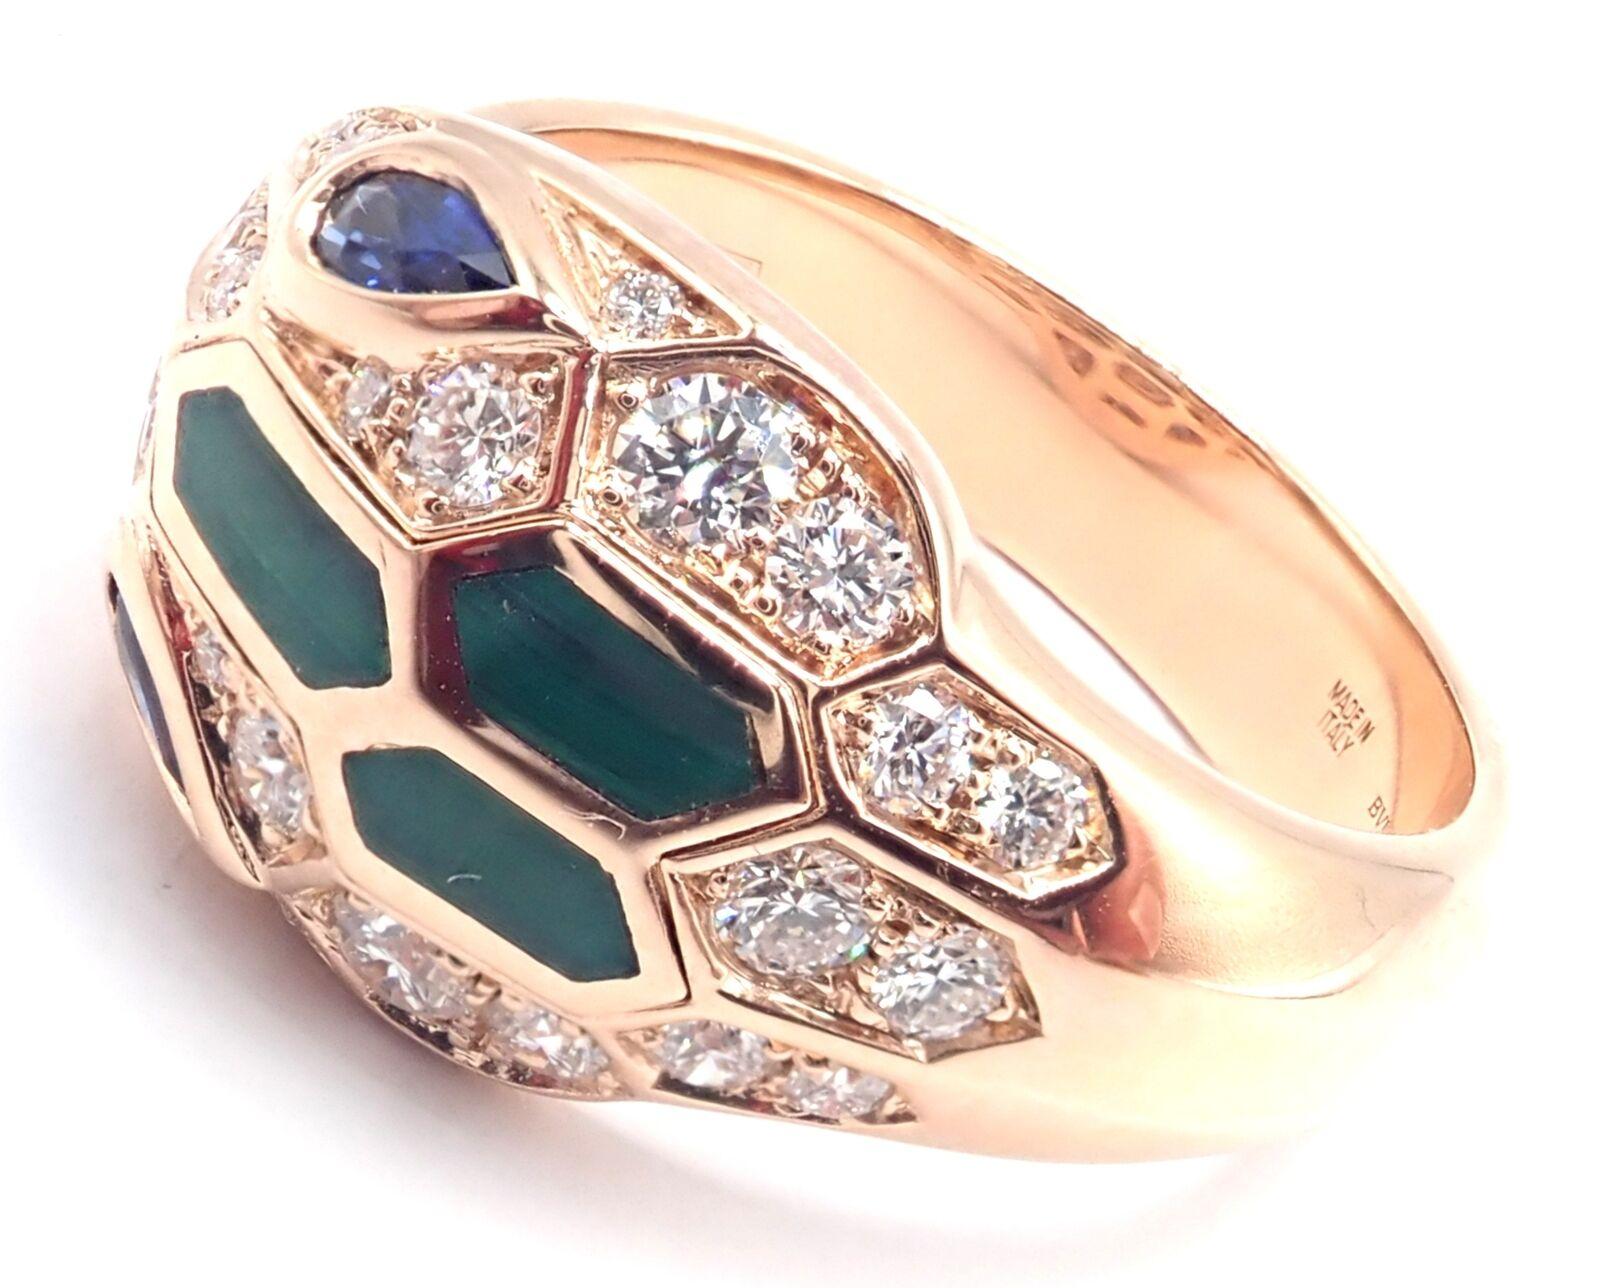 18k Rose Gold Diamond Malachite Serpenti Ring by Bulgari. 
With Round brilliant cut diamonds VS1 clarity, G color total weight approximately .38ct
Sapphires total weight approximately .21ct
Malachite stones
his necklace come with service paper from